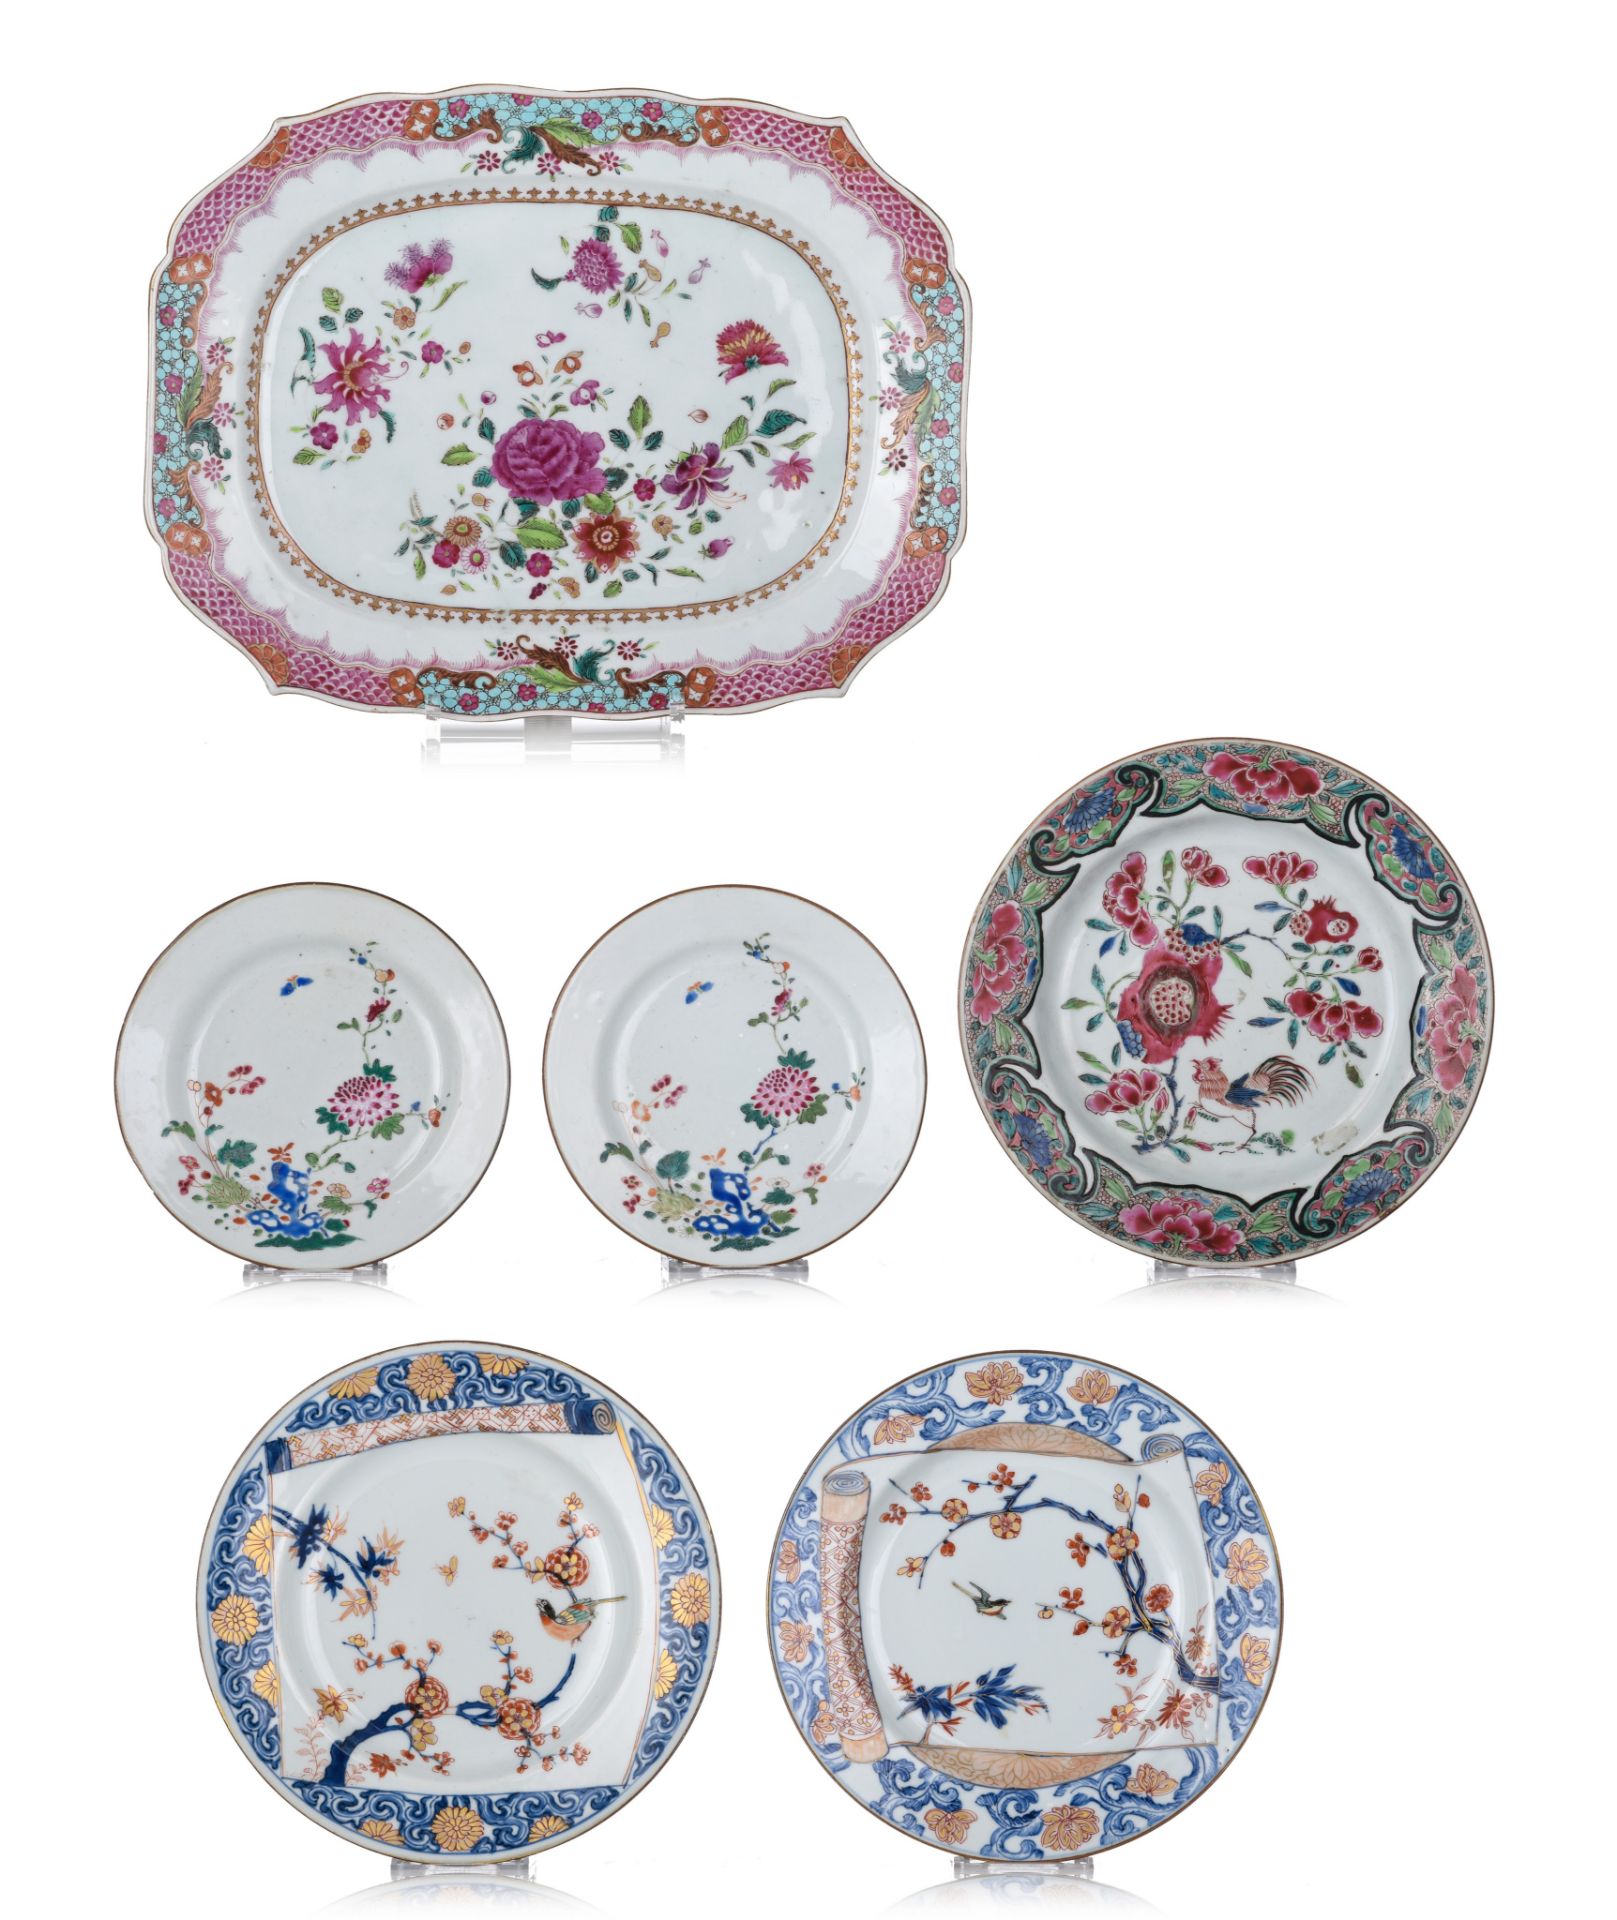 A collection of fine Chinese famille rose export porcelain dishes and a plate, 18thC, largest dimens